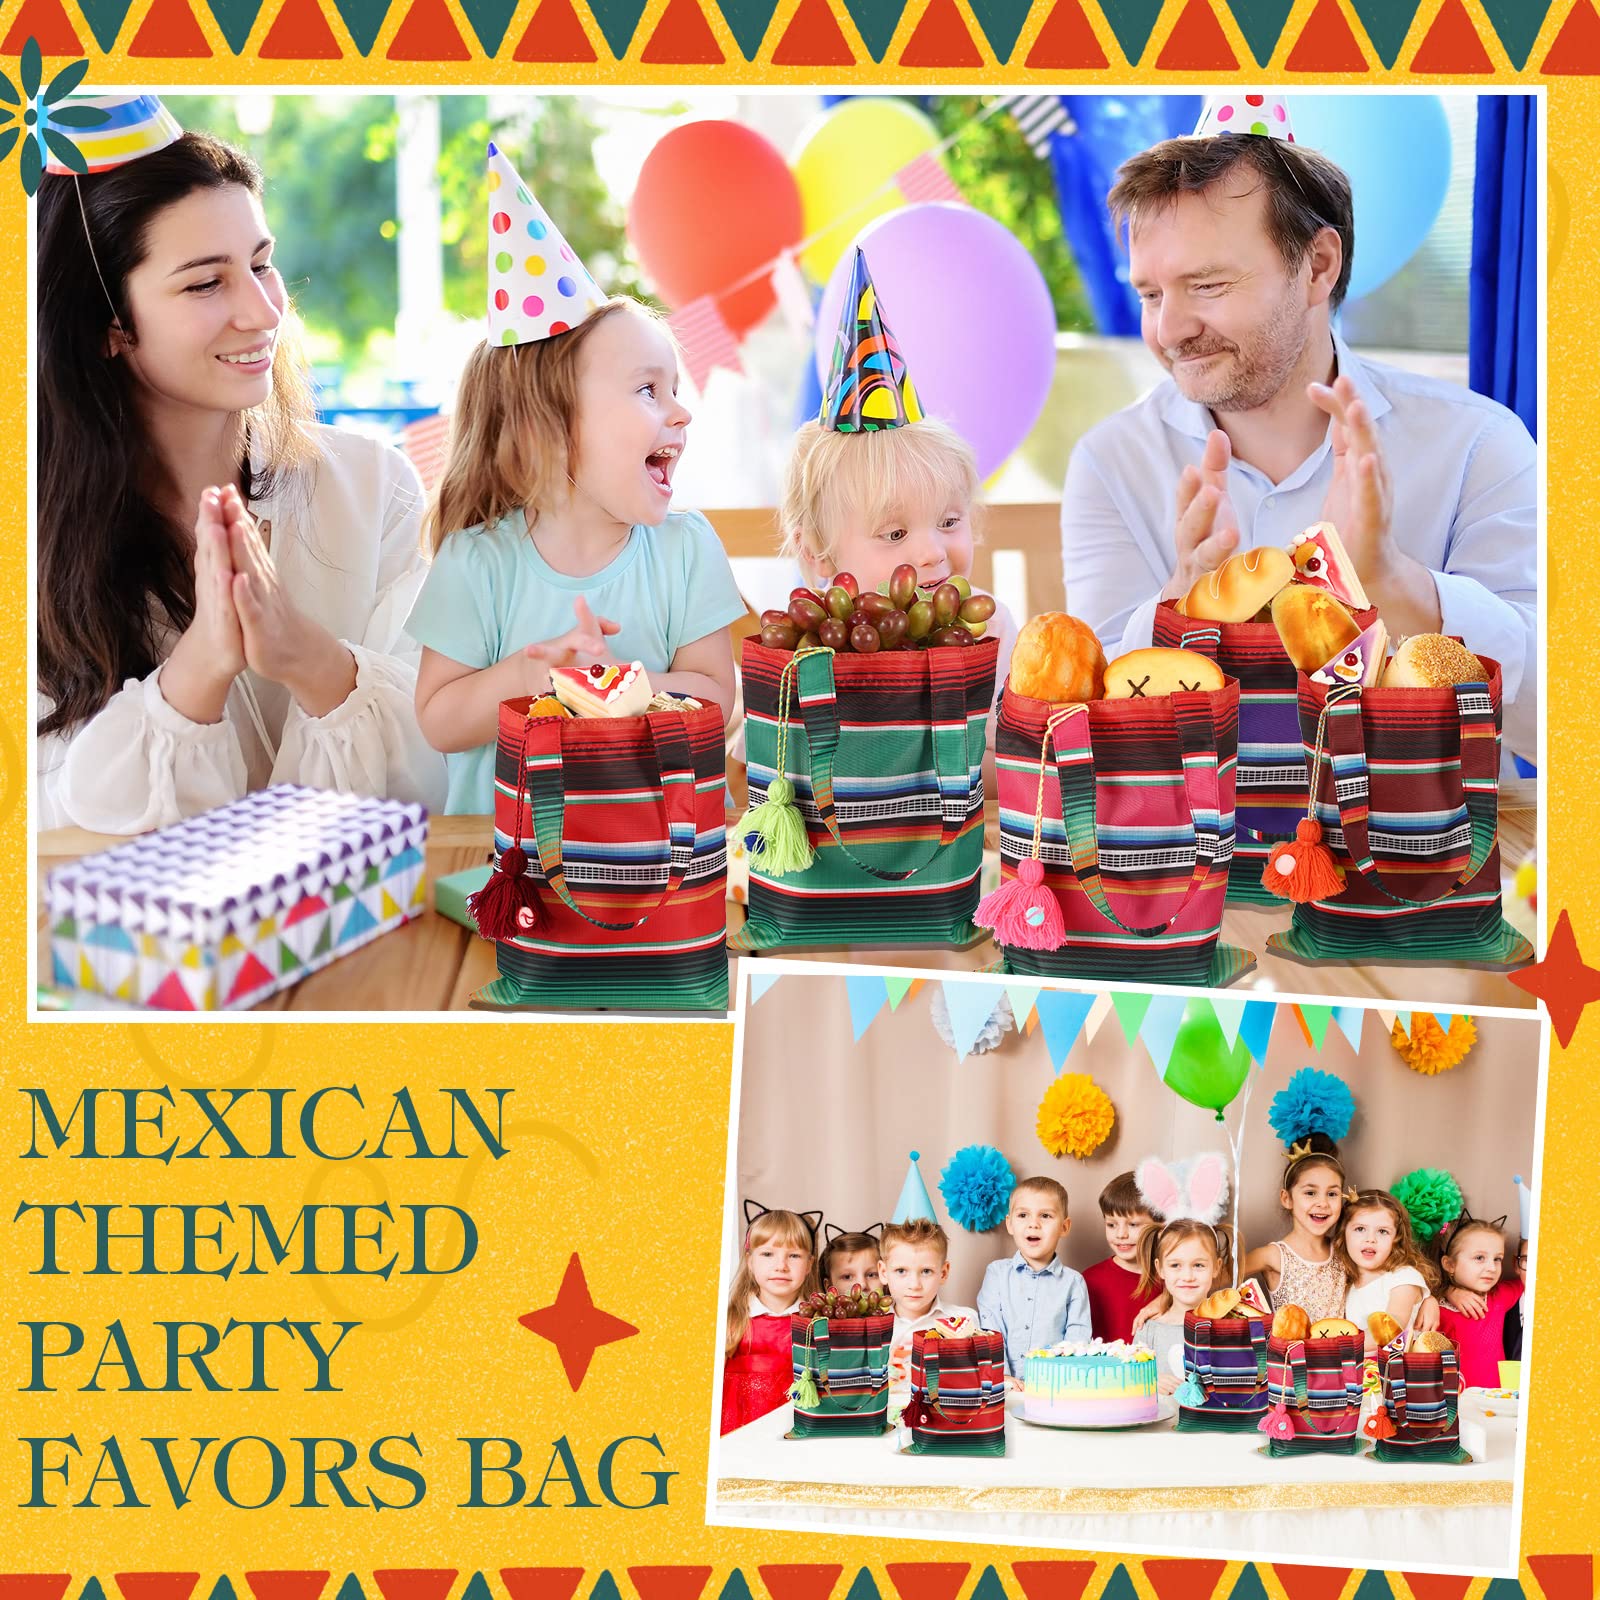 LEIFIDE 24 Pcs Mini Mexican Tote Favor Bags 10 x 8'' Mexican Bags Fiesta Mexican Candy Bags Assorted Color Gift Bags Bolsas Para Fiestas with Tassel for Mexican Cinco De Mayo Party Decoration Supplies